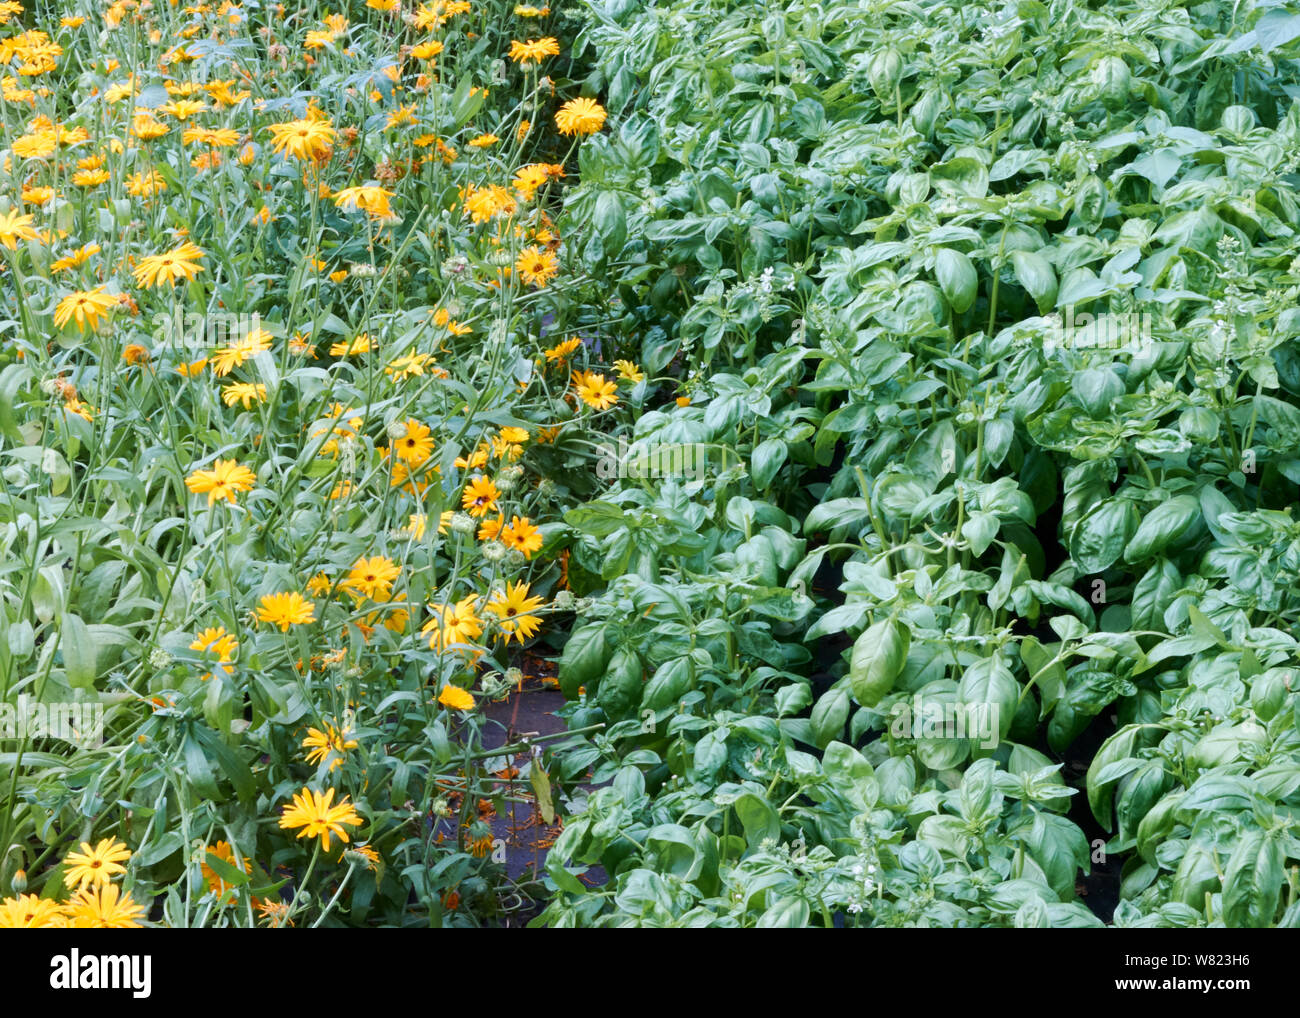 An organic farm in Oxfordshire illustrating crops, pest control, diversity  of crops, cultivation methods, harvesting, and production of "veggie" boxes  for consumers Stock Photo - Alamy